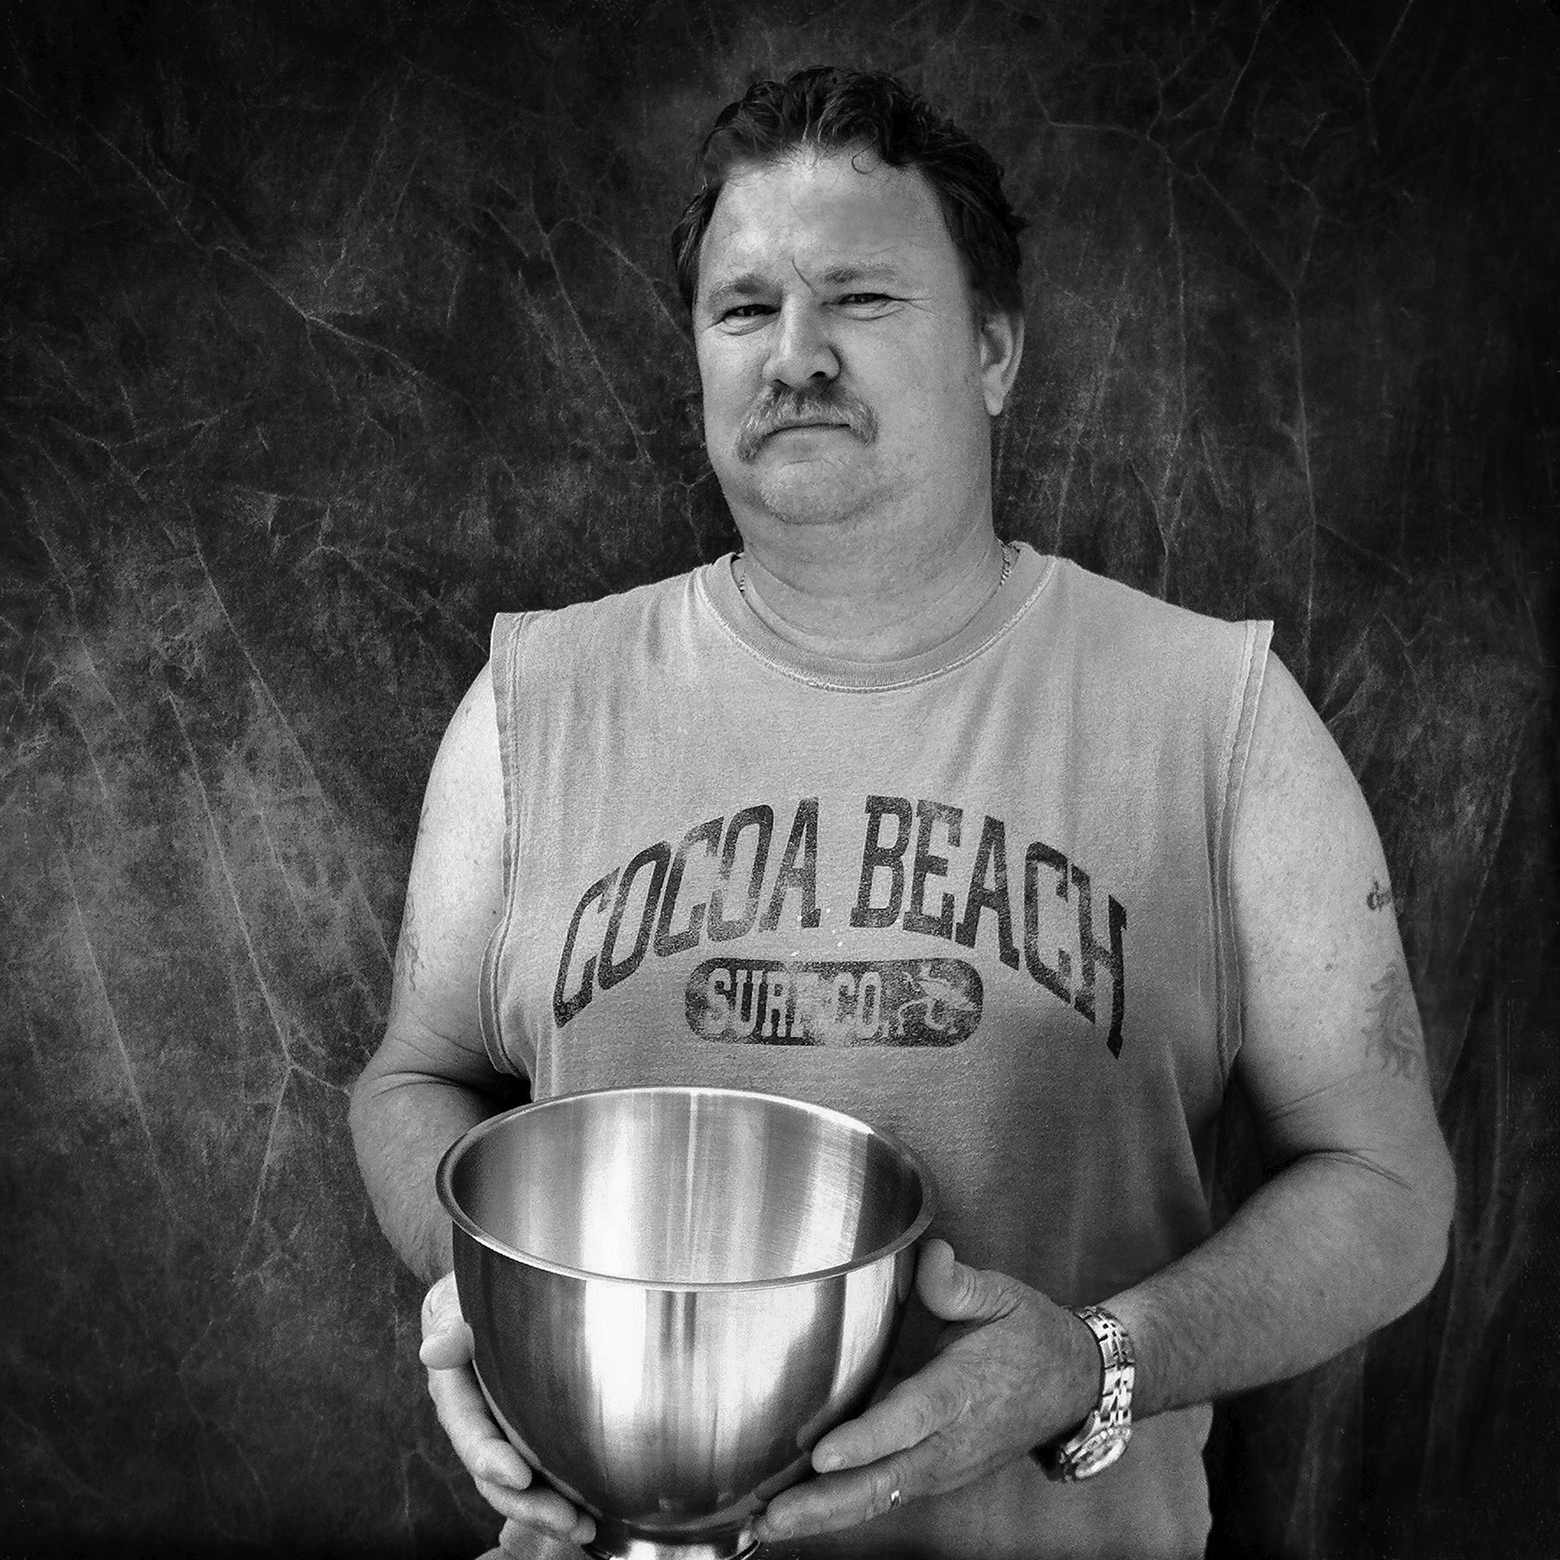 A man with a moustache wearing a sleeveless T-shirt that reads “Cocoa Beach Surf Co.” holds a metal mixing bowl.